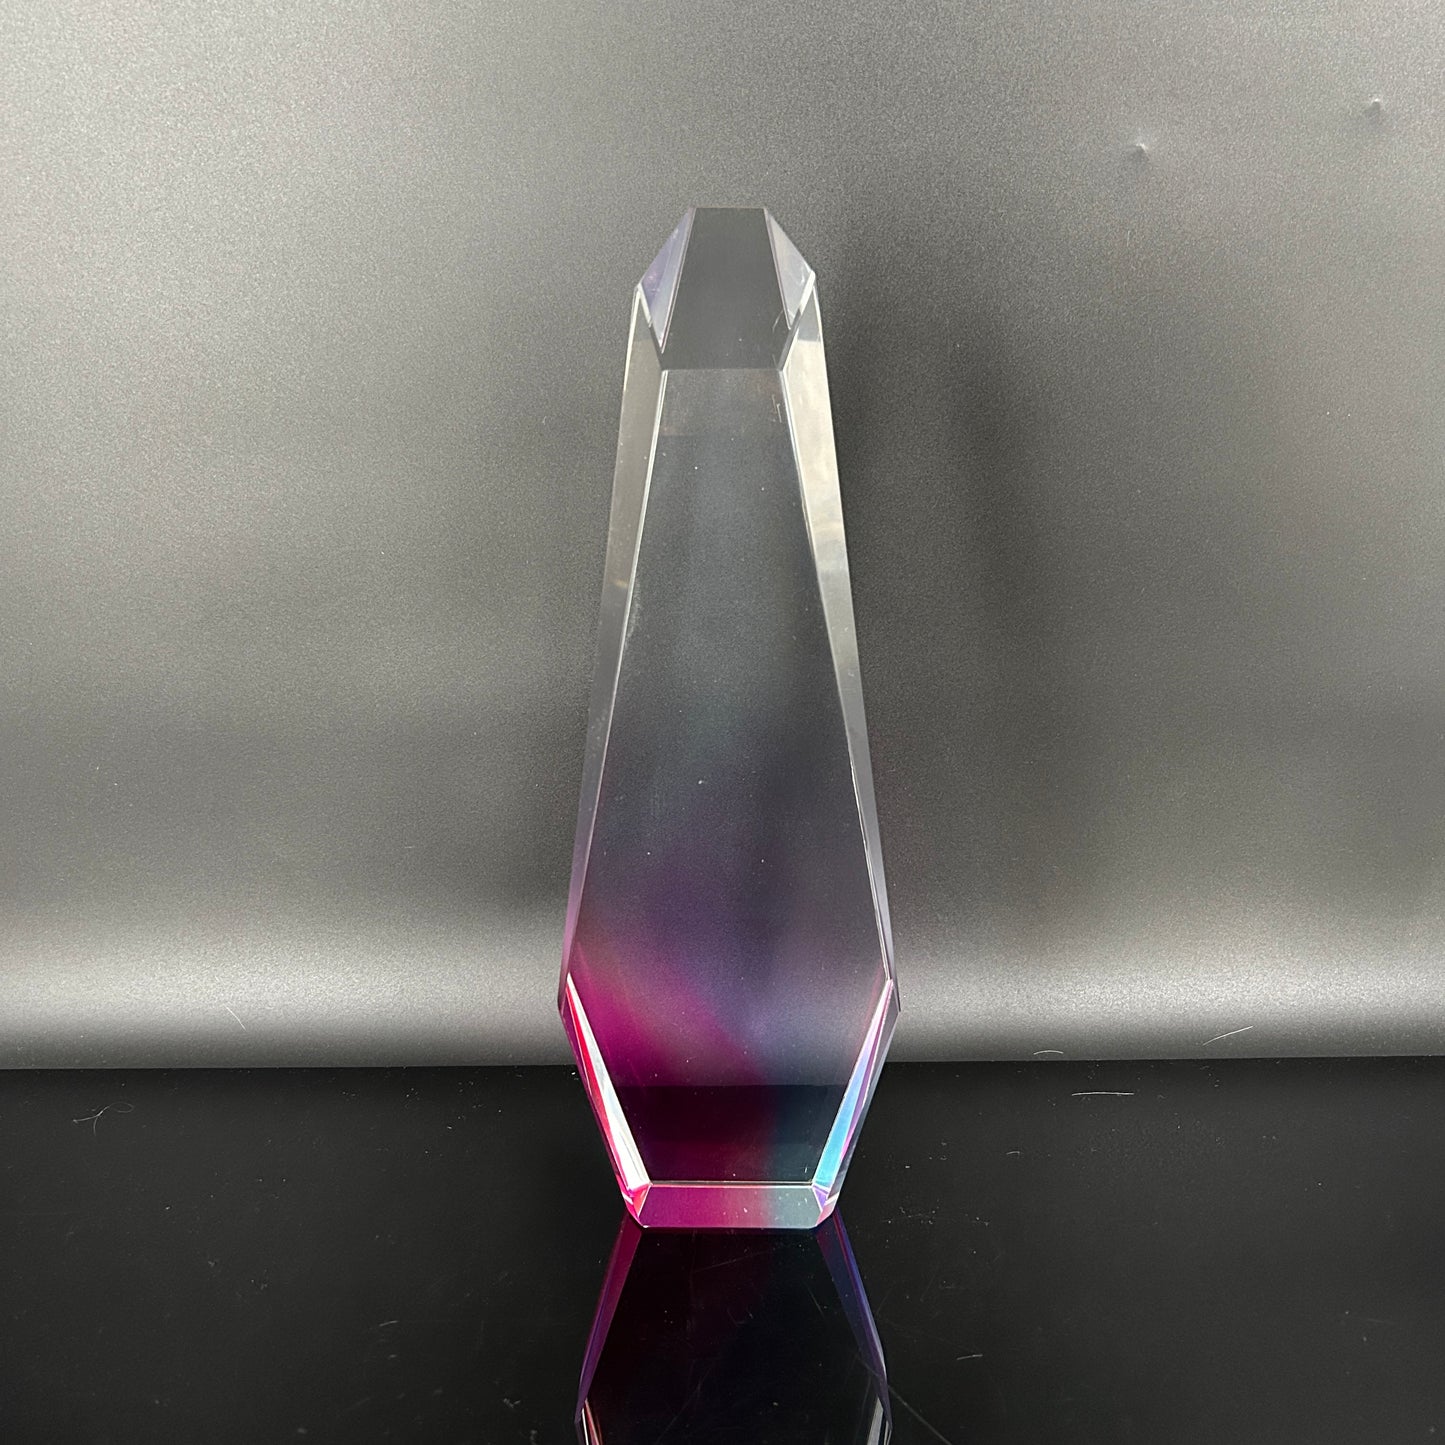 Prism Crown Achievement Award with Radiant Colors